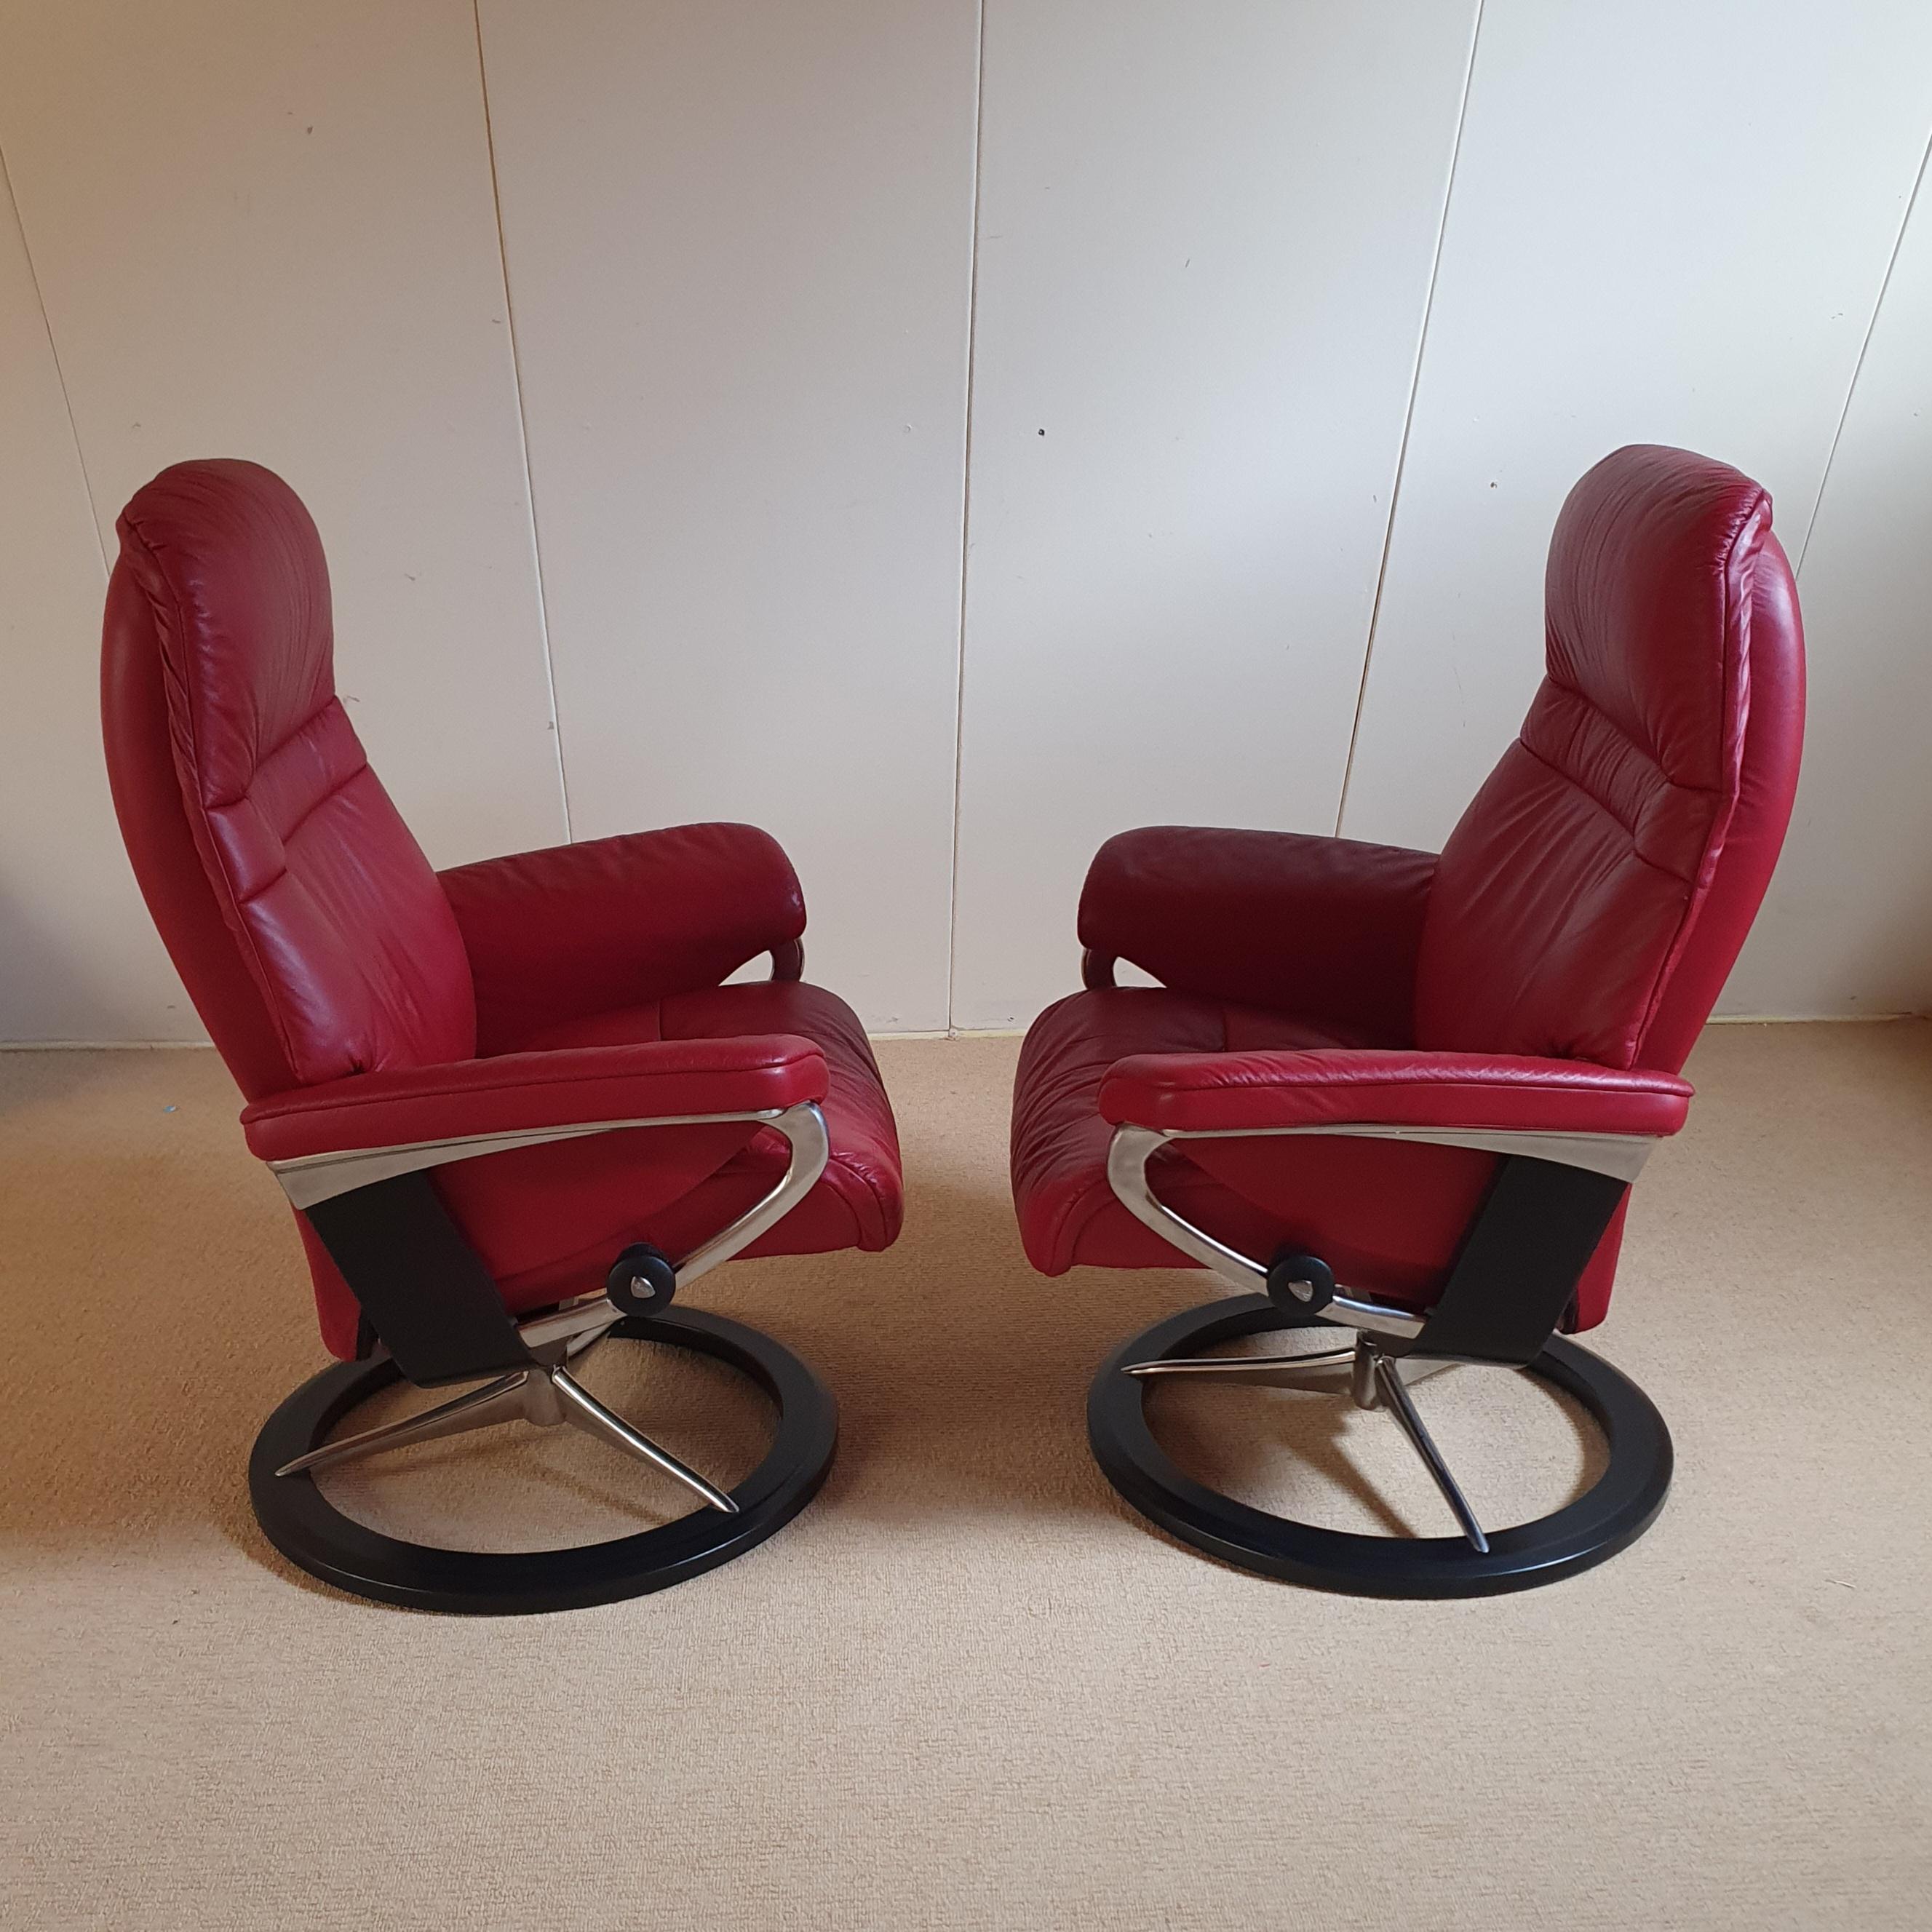 2 x Stressless Aura Recliner chairs with Signature in Cori leather Brick Red 8